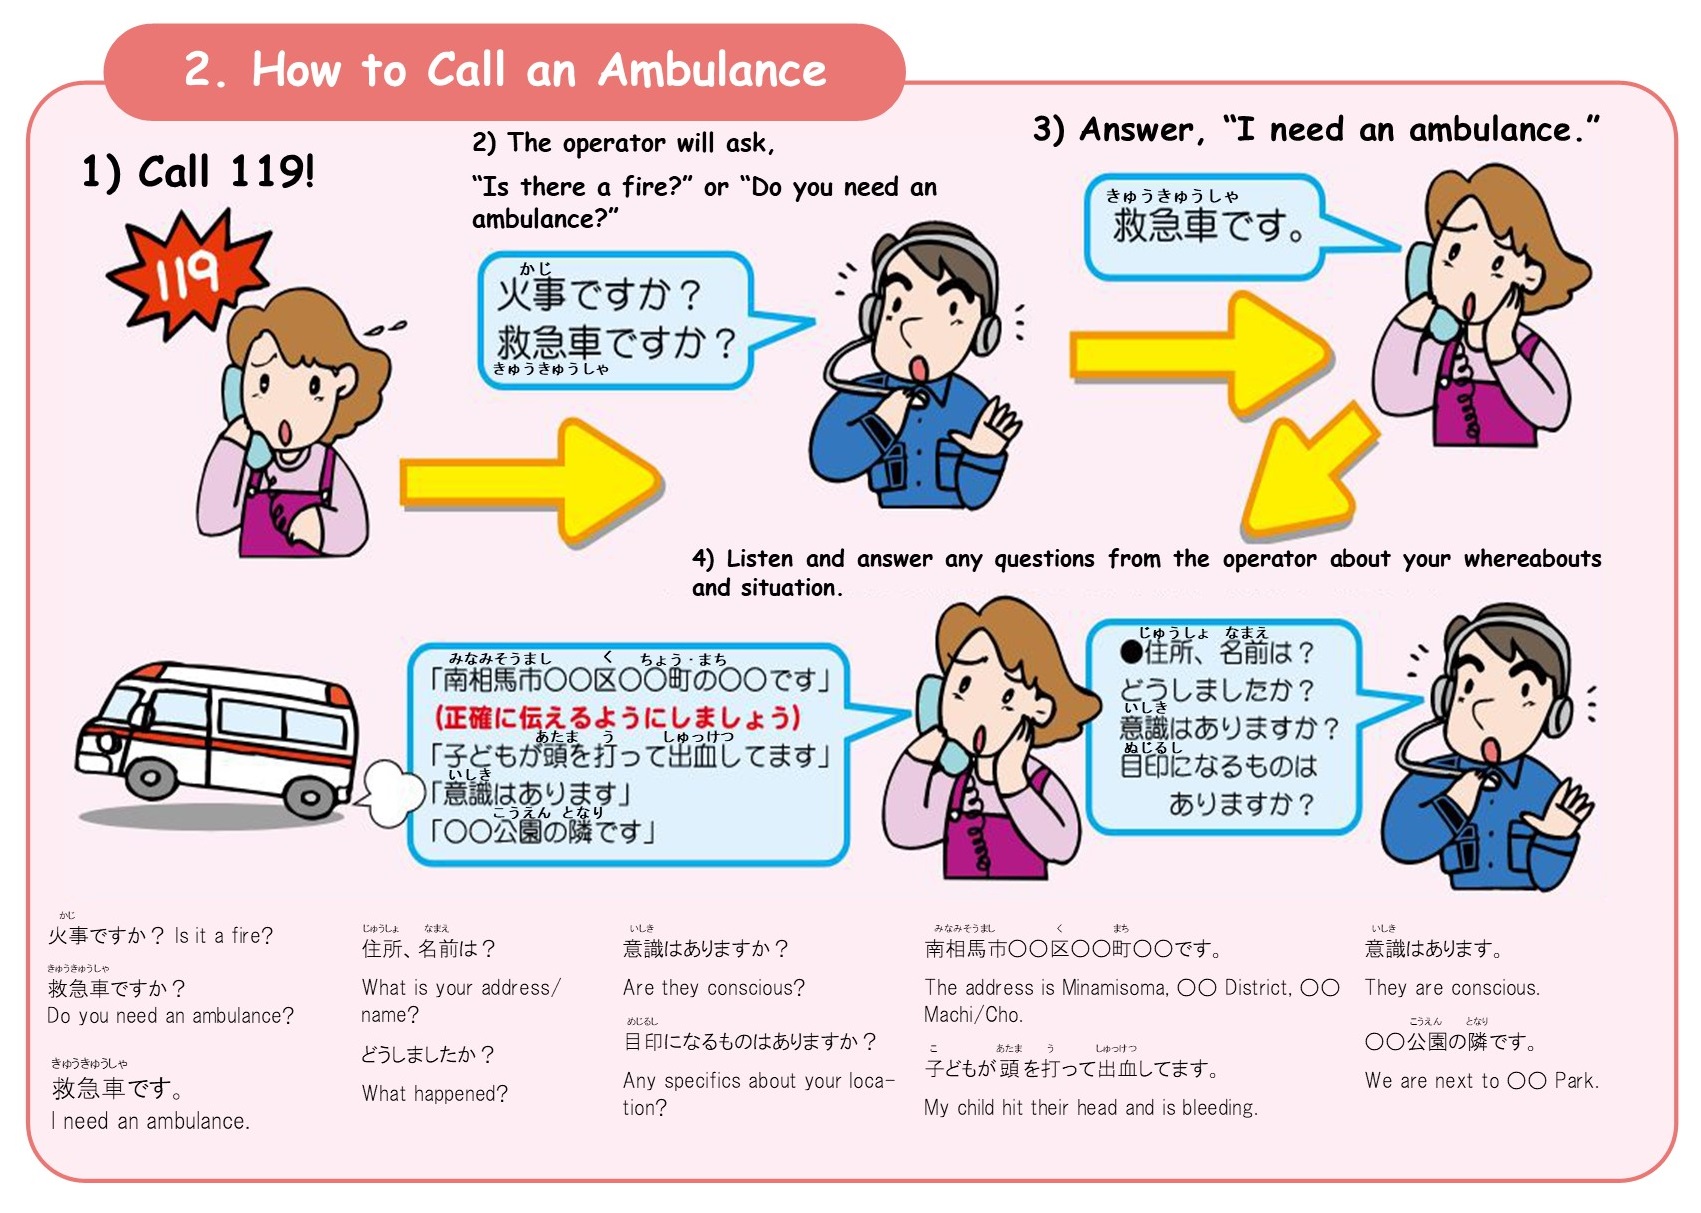 How to call an ambulance